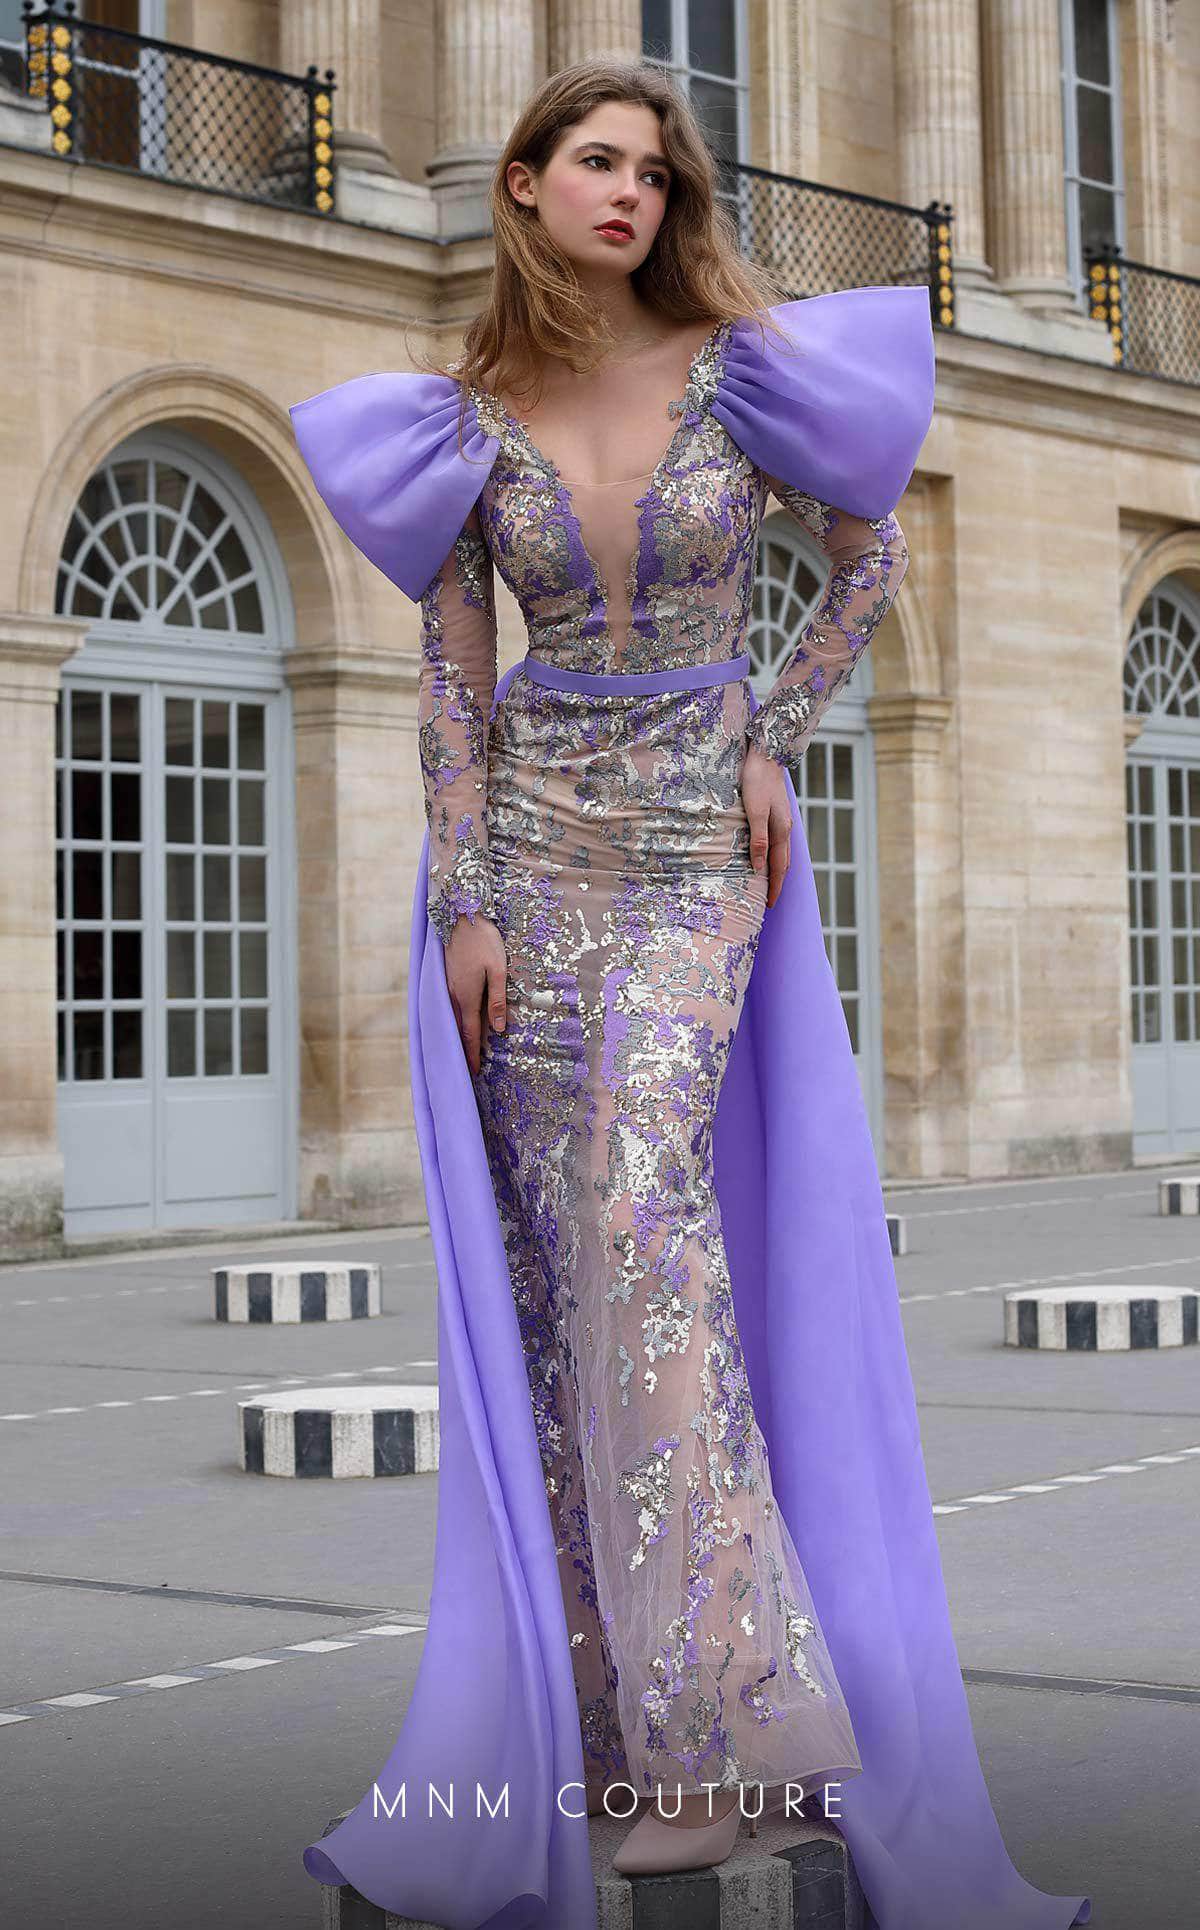 MNM Couture K4075 - Bow Sleeve Embellished Illusion Gown
